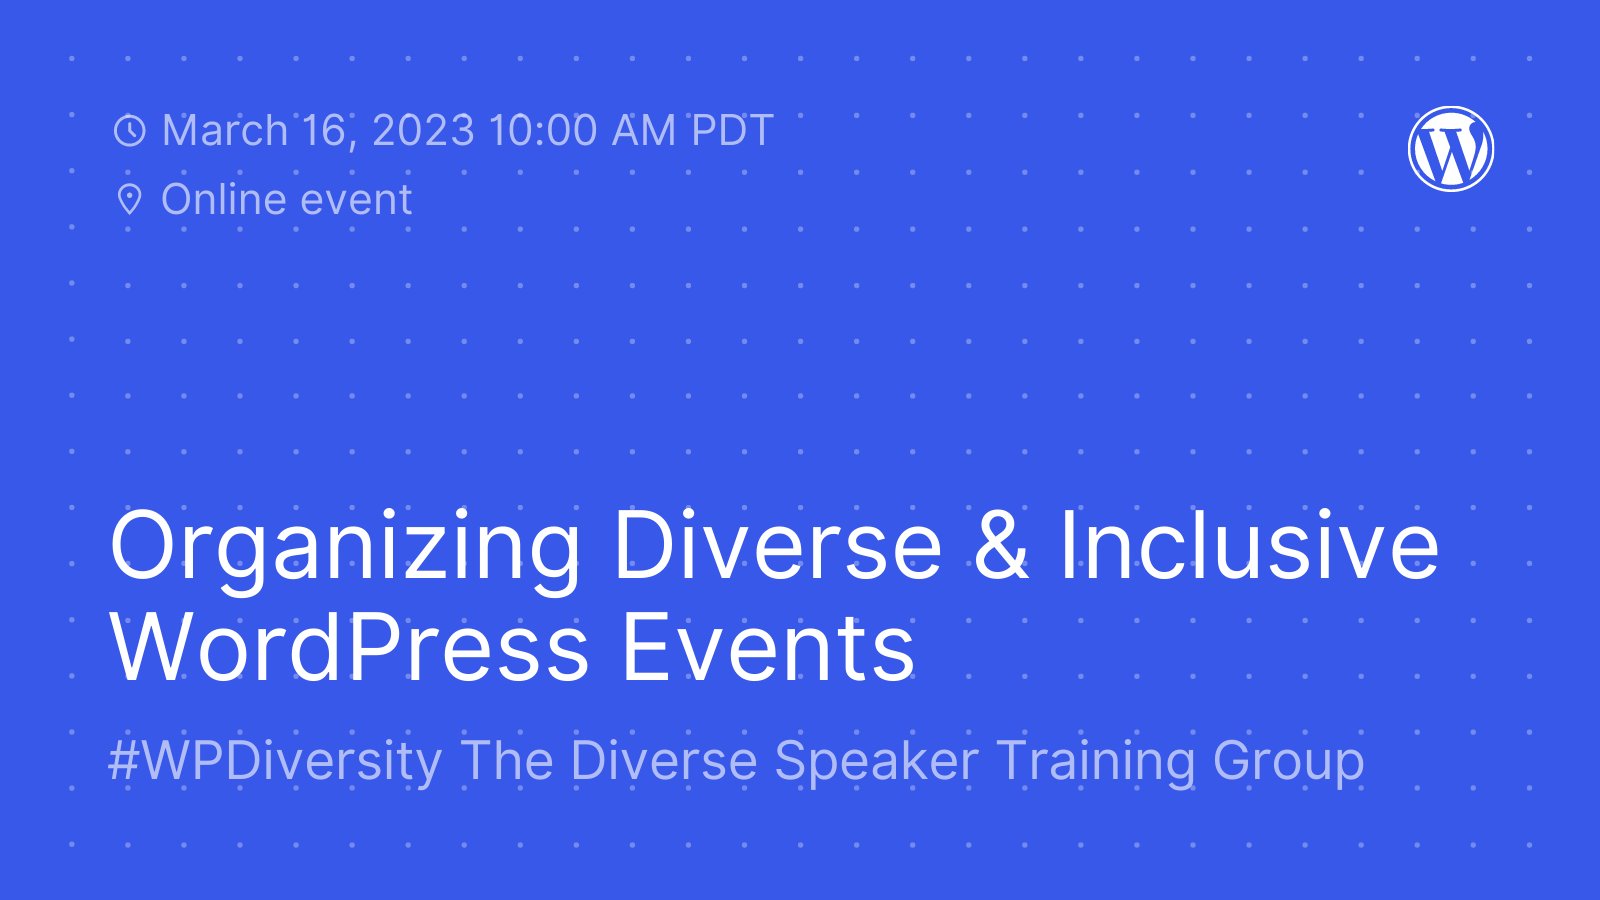 Blue background with white dot detail and text, "Organizing Diverse & Inclusive WordPress Events. March 16, 2023 10:00 AM PDT. Online event." 